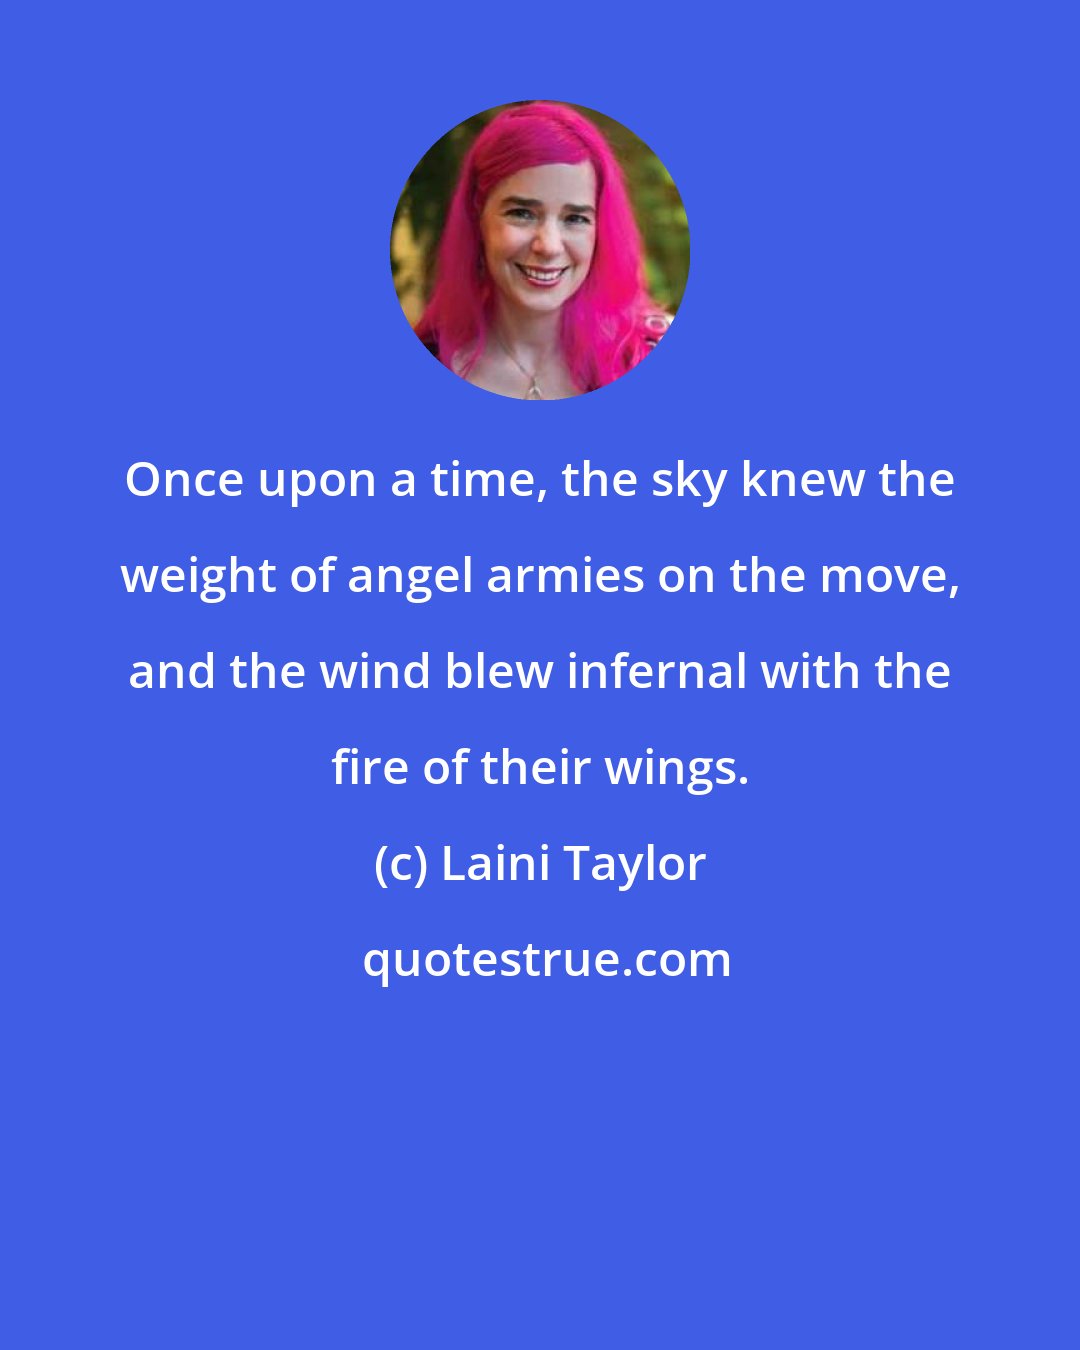 Laini Taylor: Once upon a time, the sky knew the weight of angel armies on the move, and the wind blew infernal with the fire of their wings.